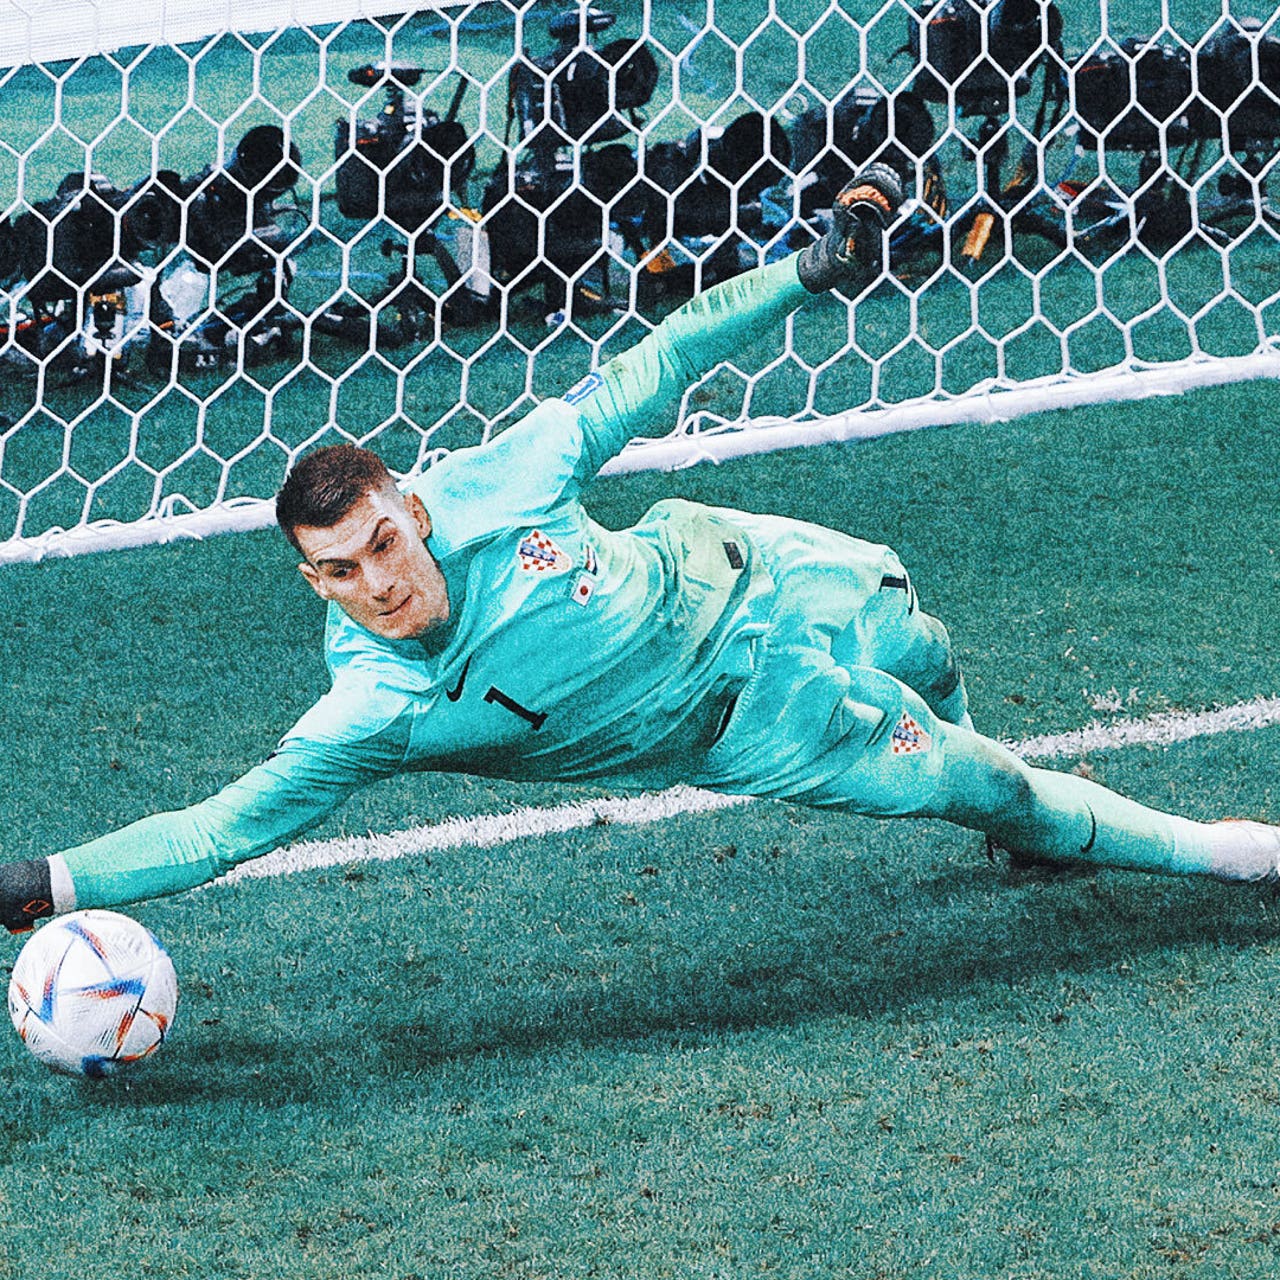 What is a penalty shootout and how does it work in the World Cup? 